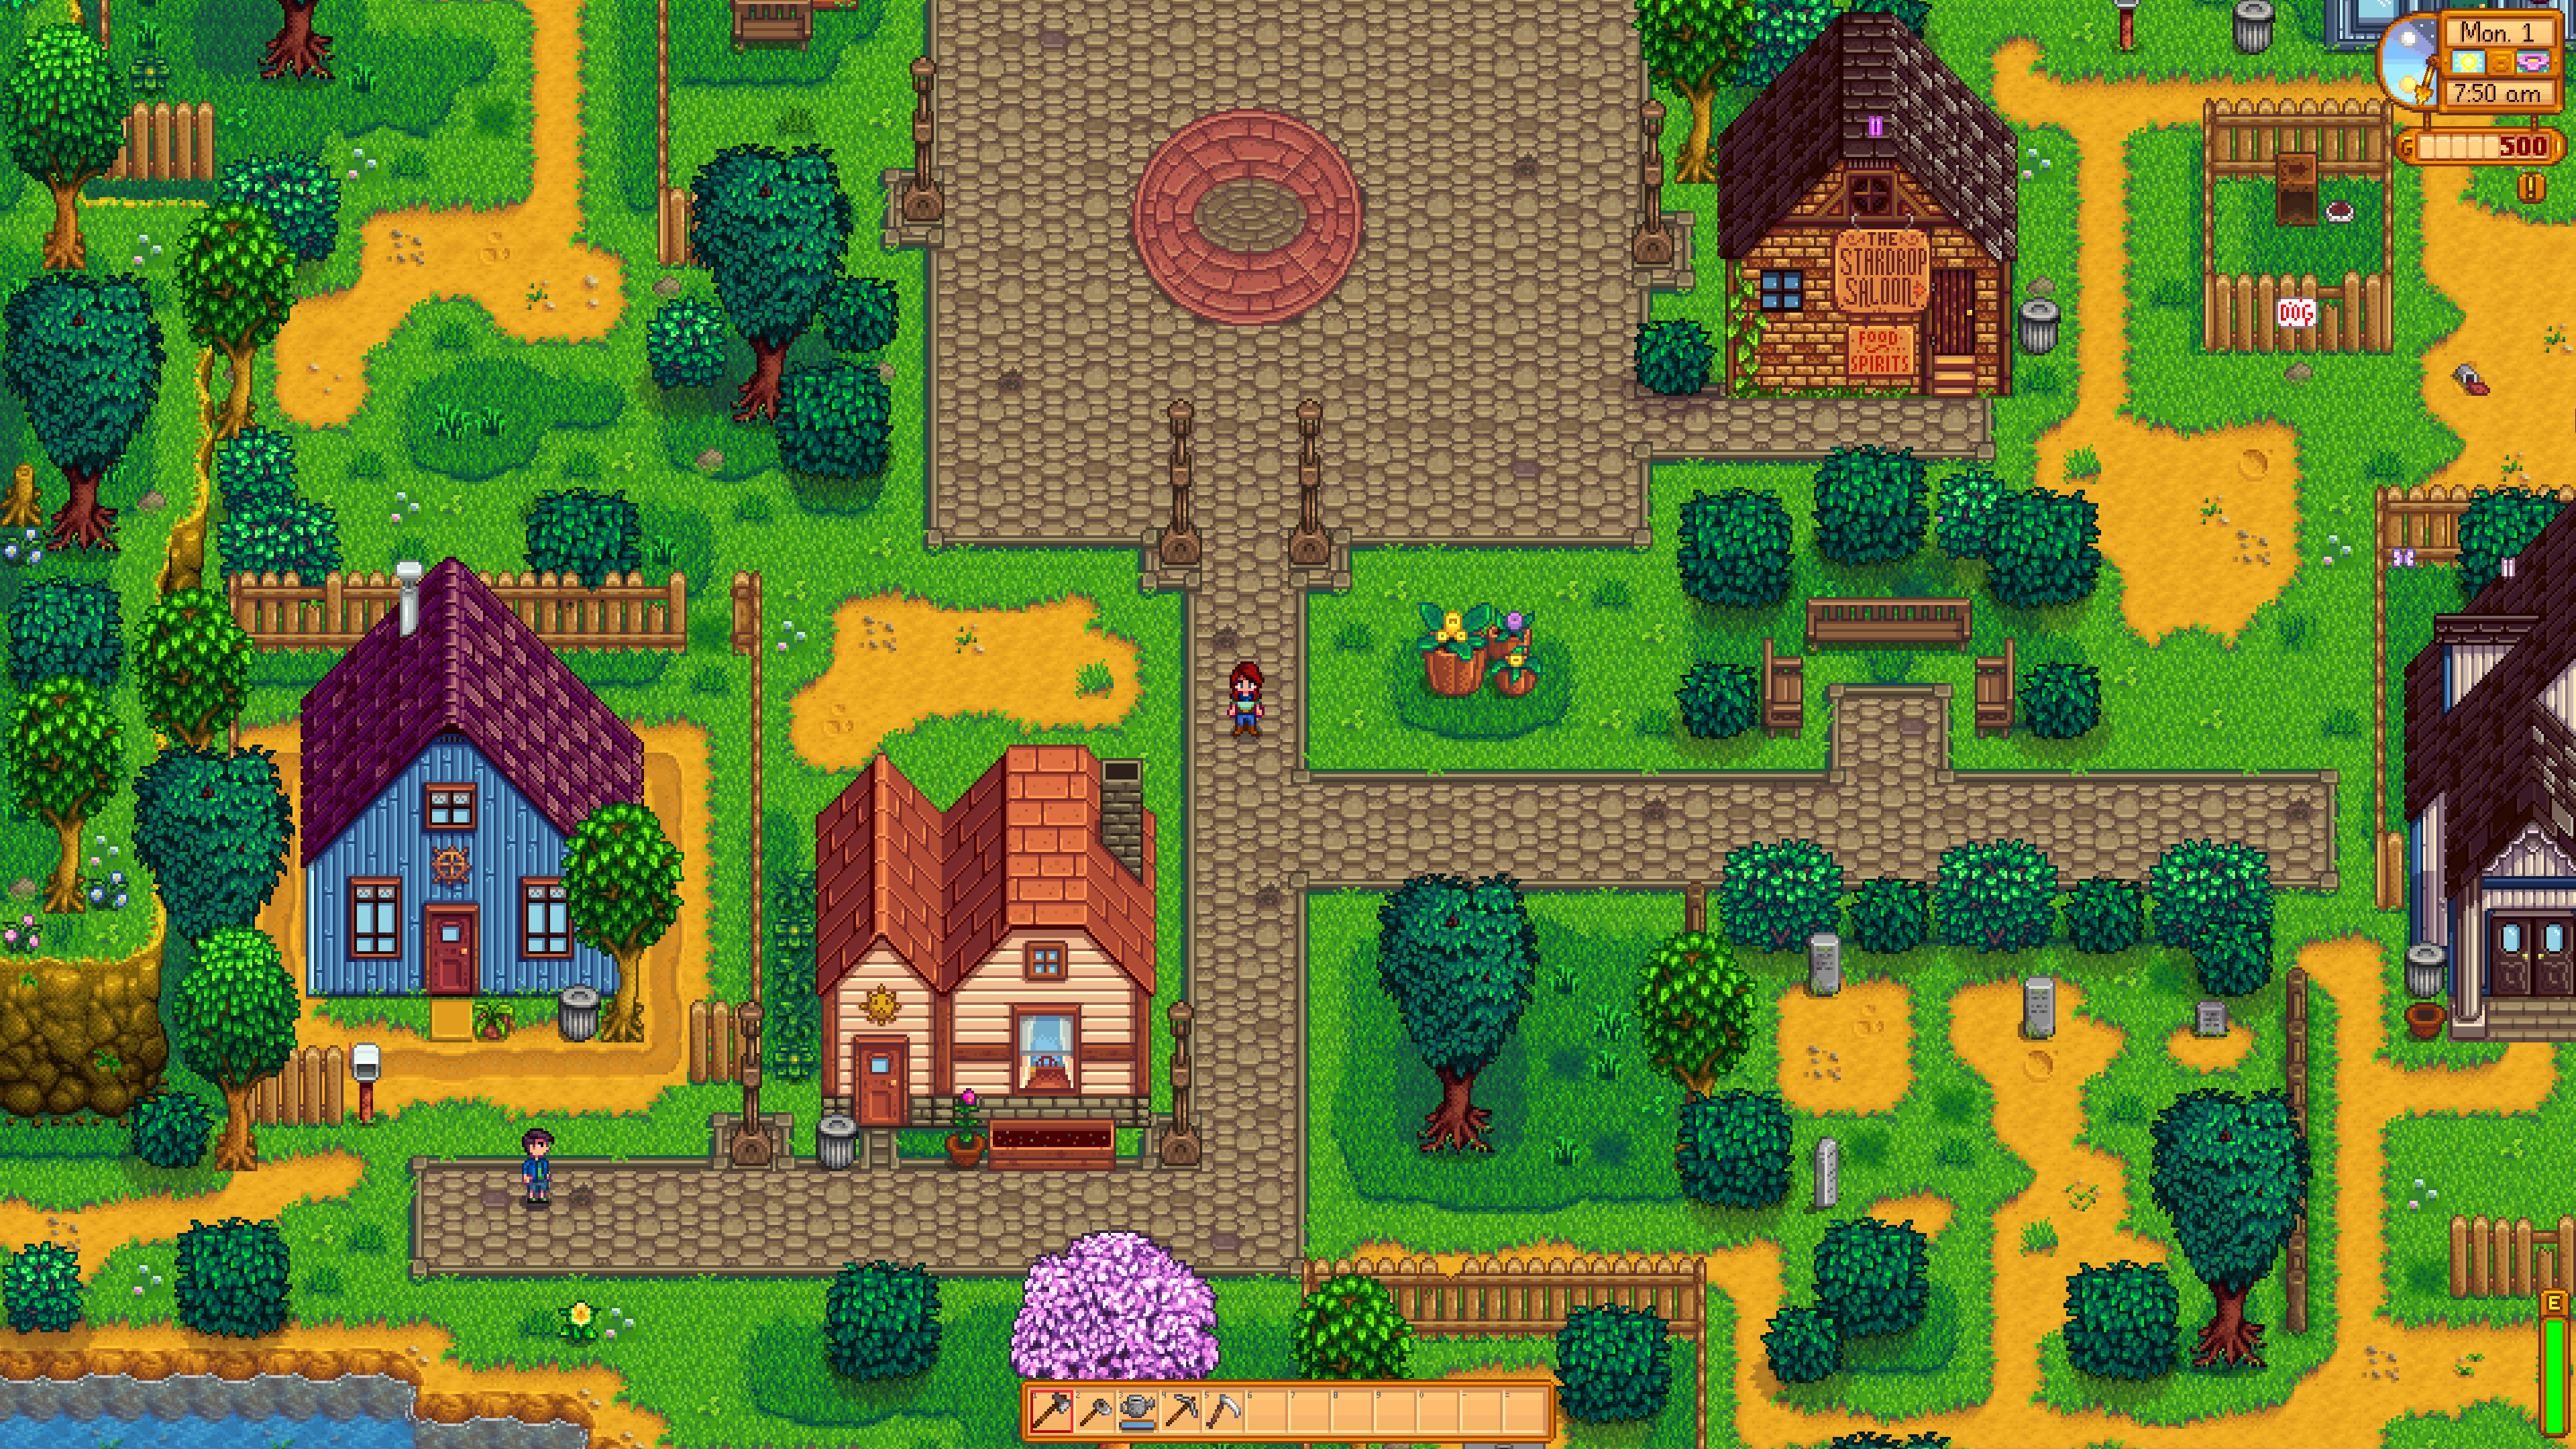 Best Games Like Stardew Valley: Our Picks for 2023 (Farming Games and Other Similar Games)